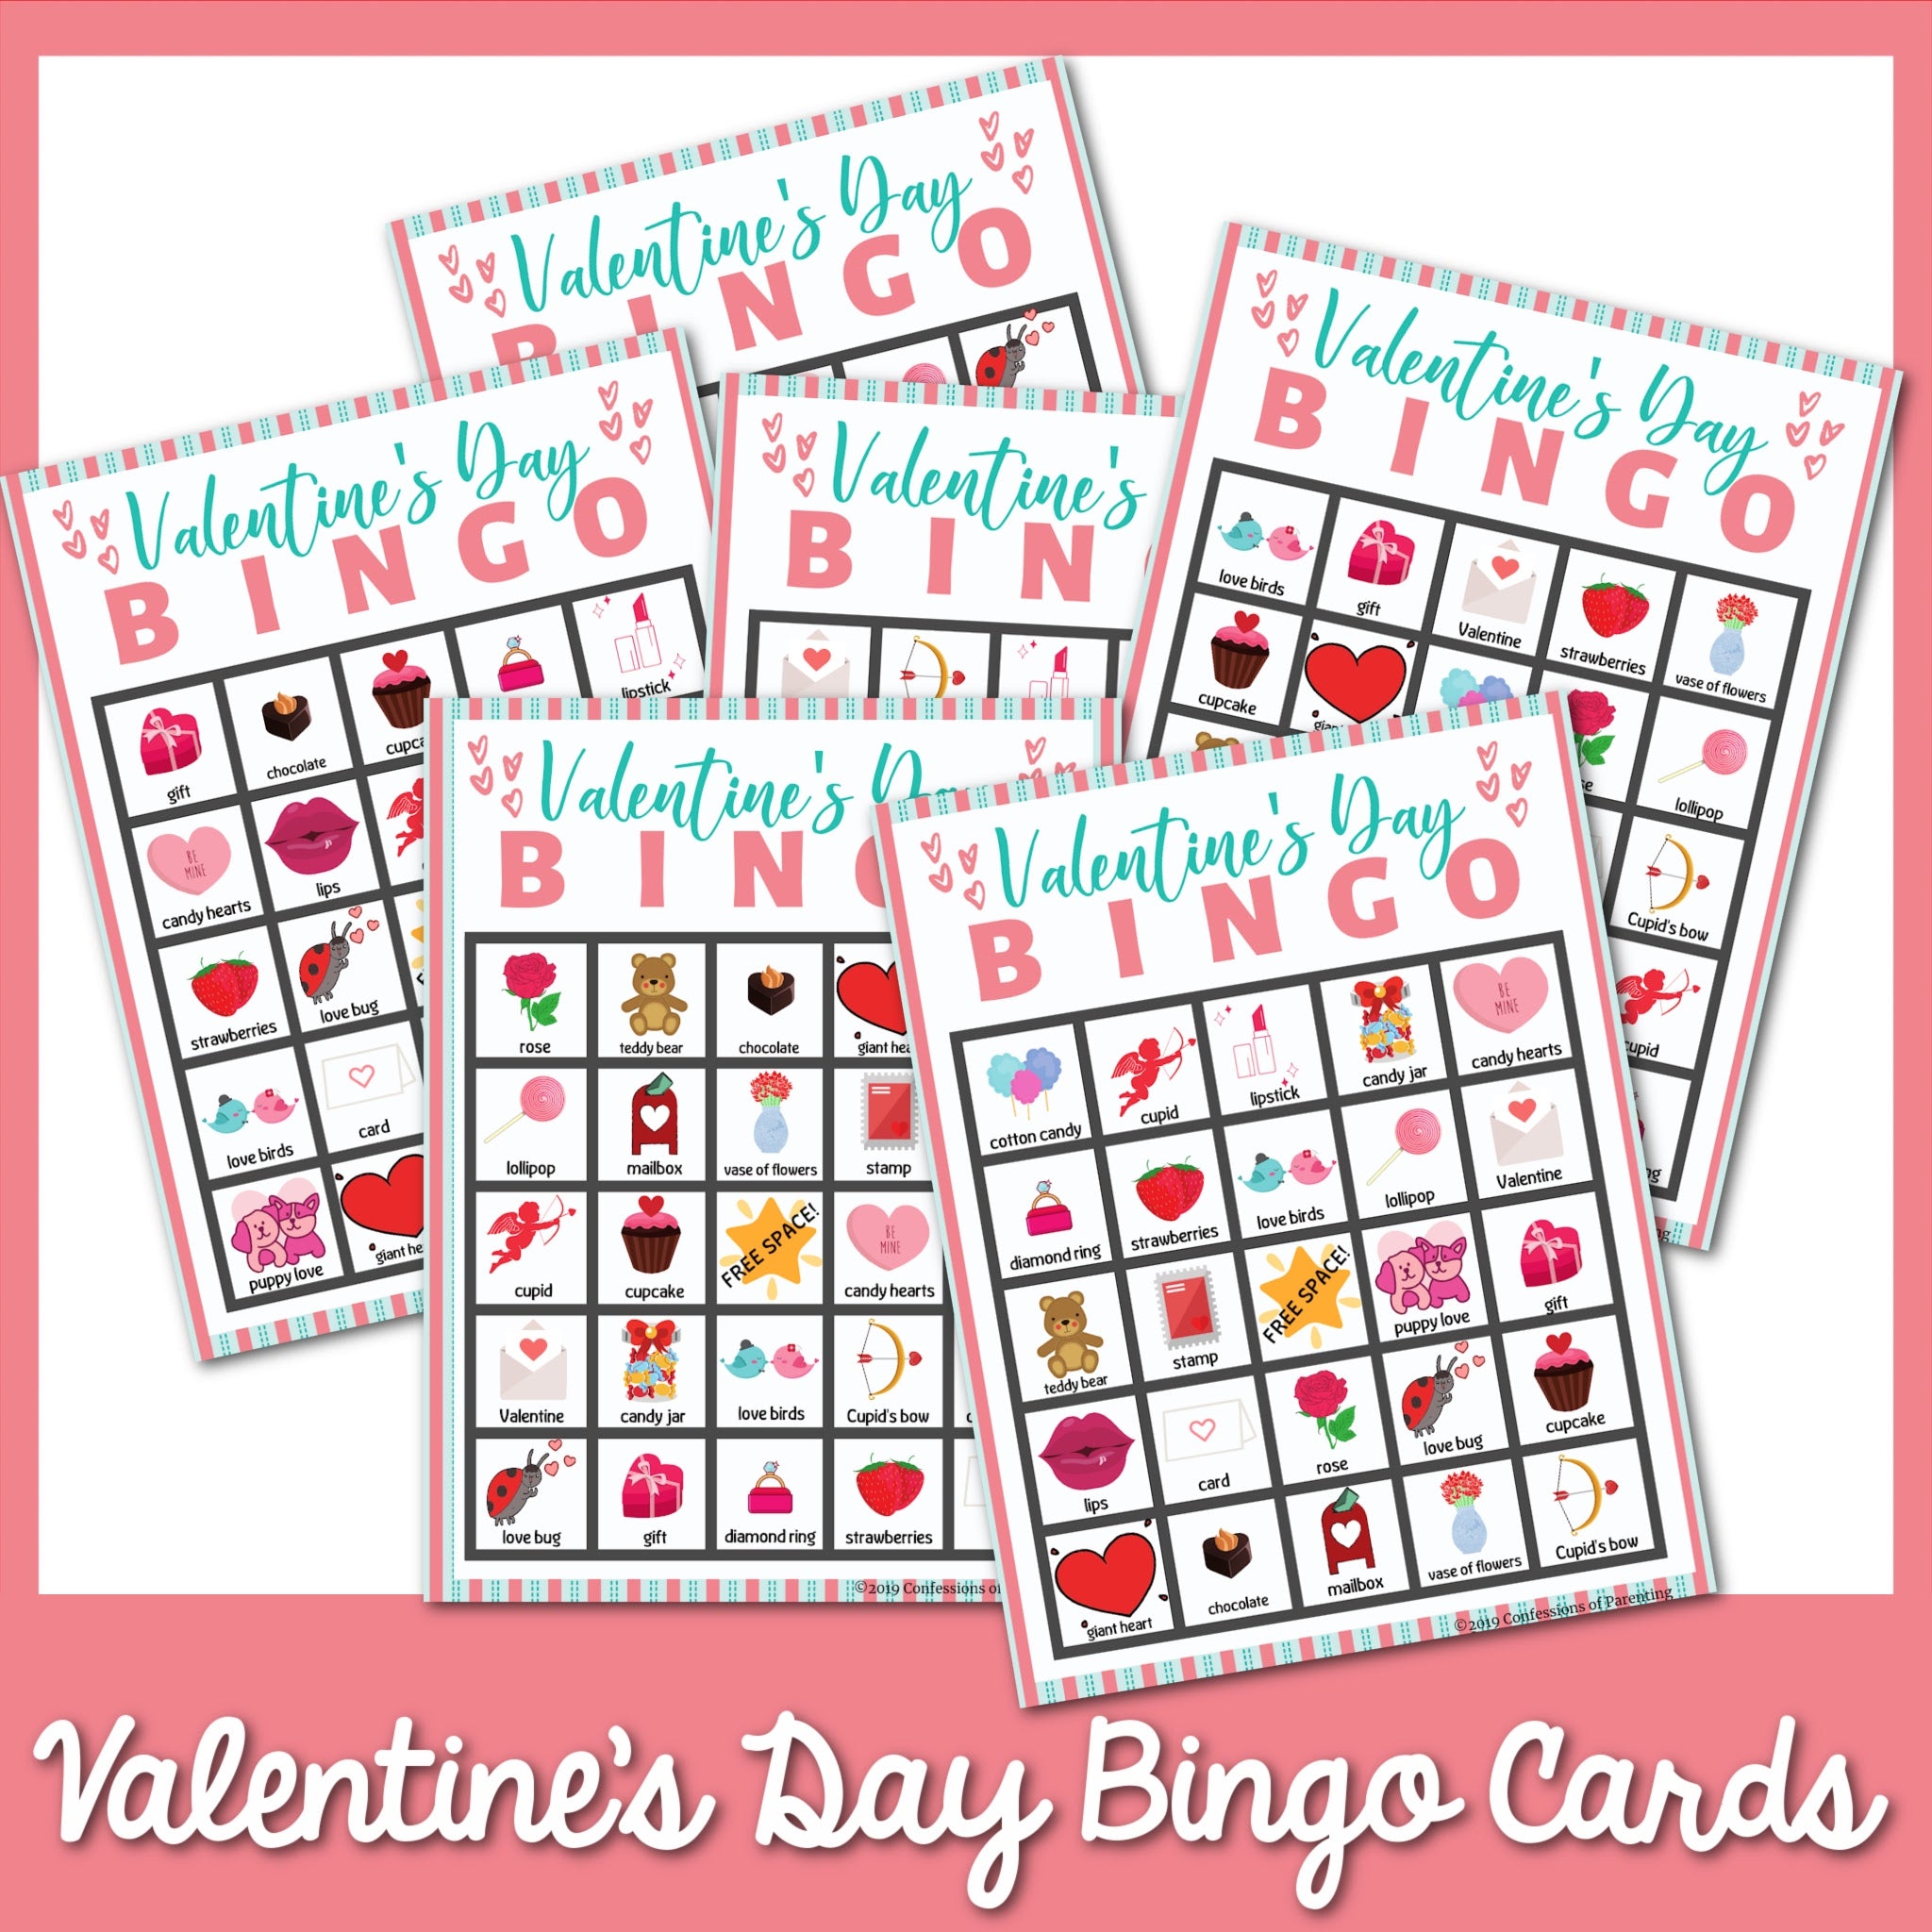 Construction Paper Valentine Crafts - Frosting and Glue- Easy crafts,  games, recipes, and fun